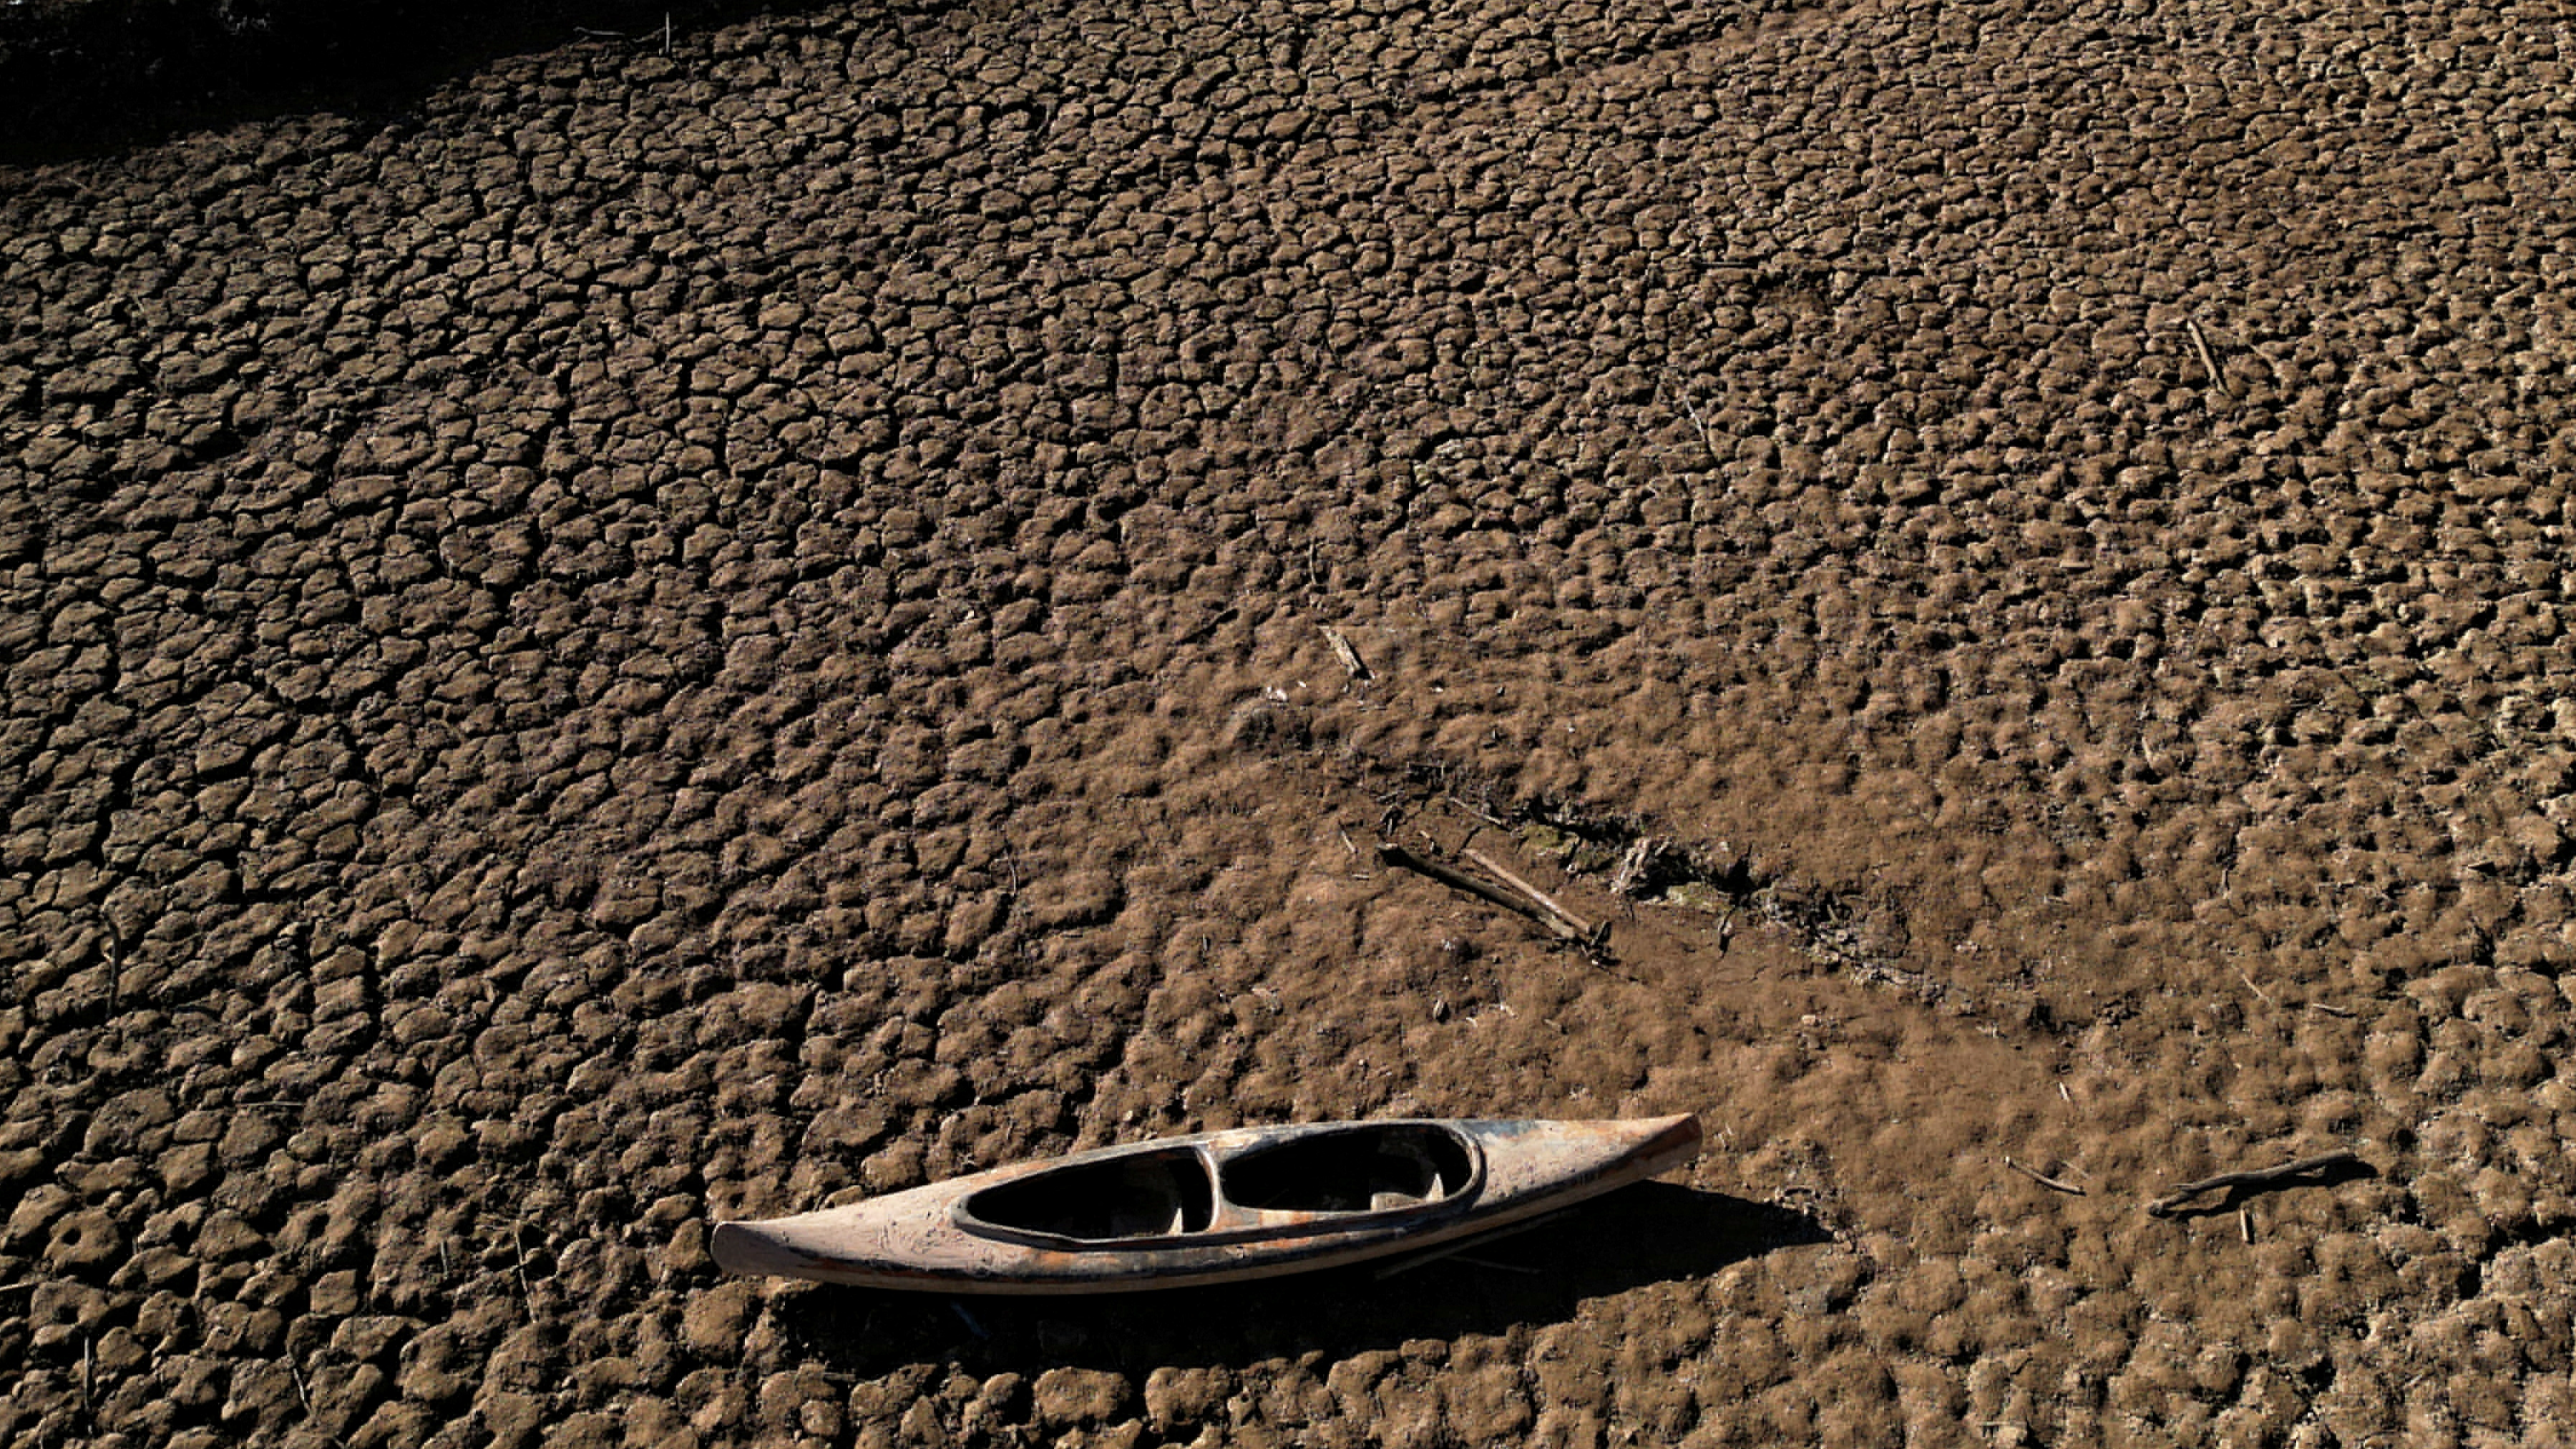 Catalonian authorities have declared a drought emergency for Barcelona after the region's reservoirs dropped to below 16 percent capacity. /Nacho Doce/Reuters
